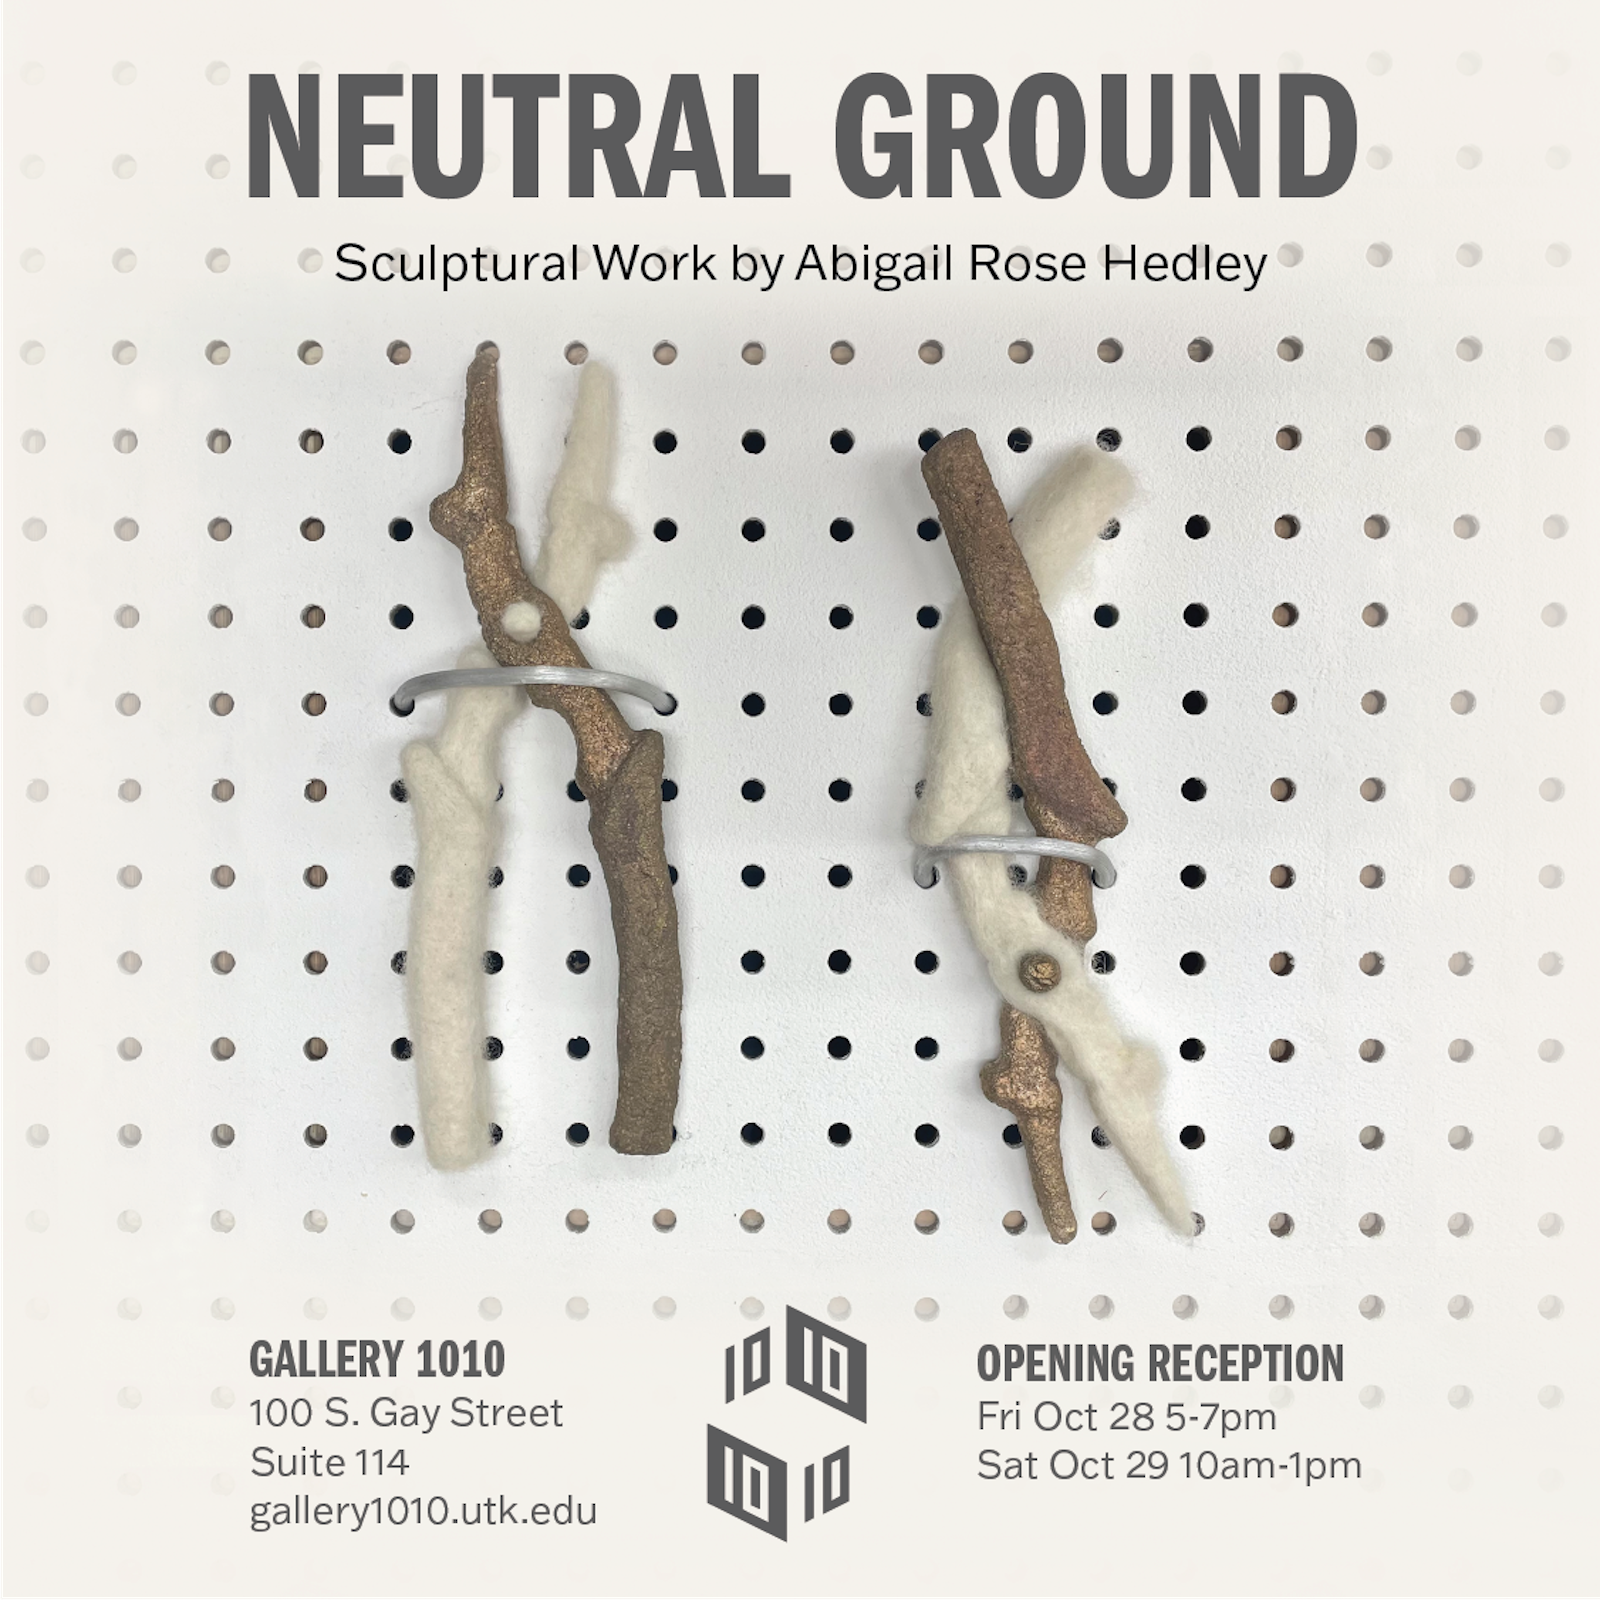 Advertisement for Neutral Ground: Sculptural Work by Abigail Rose Hedley